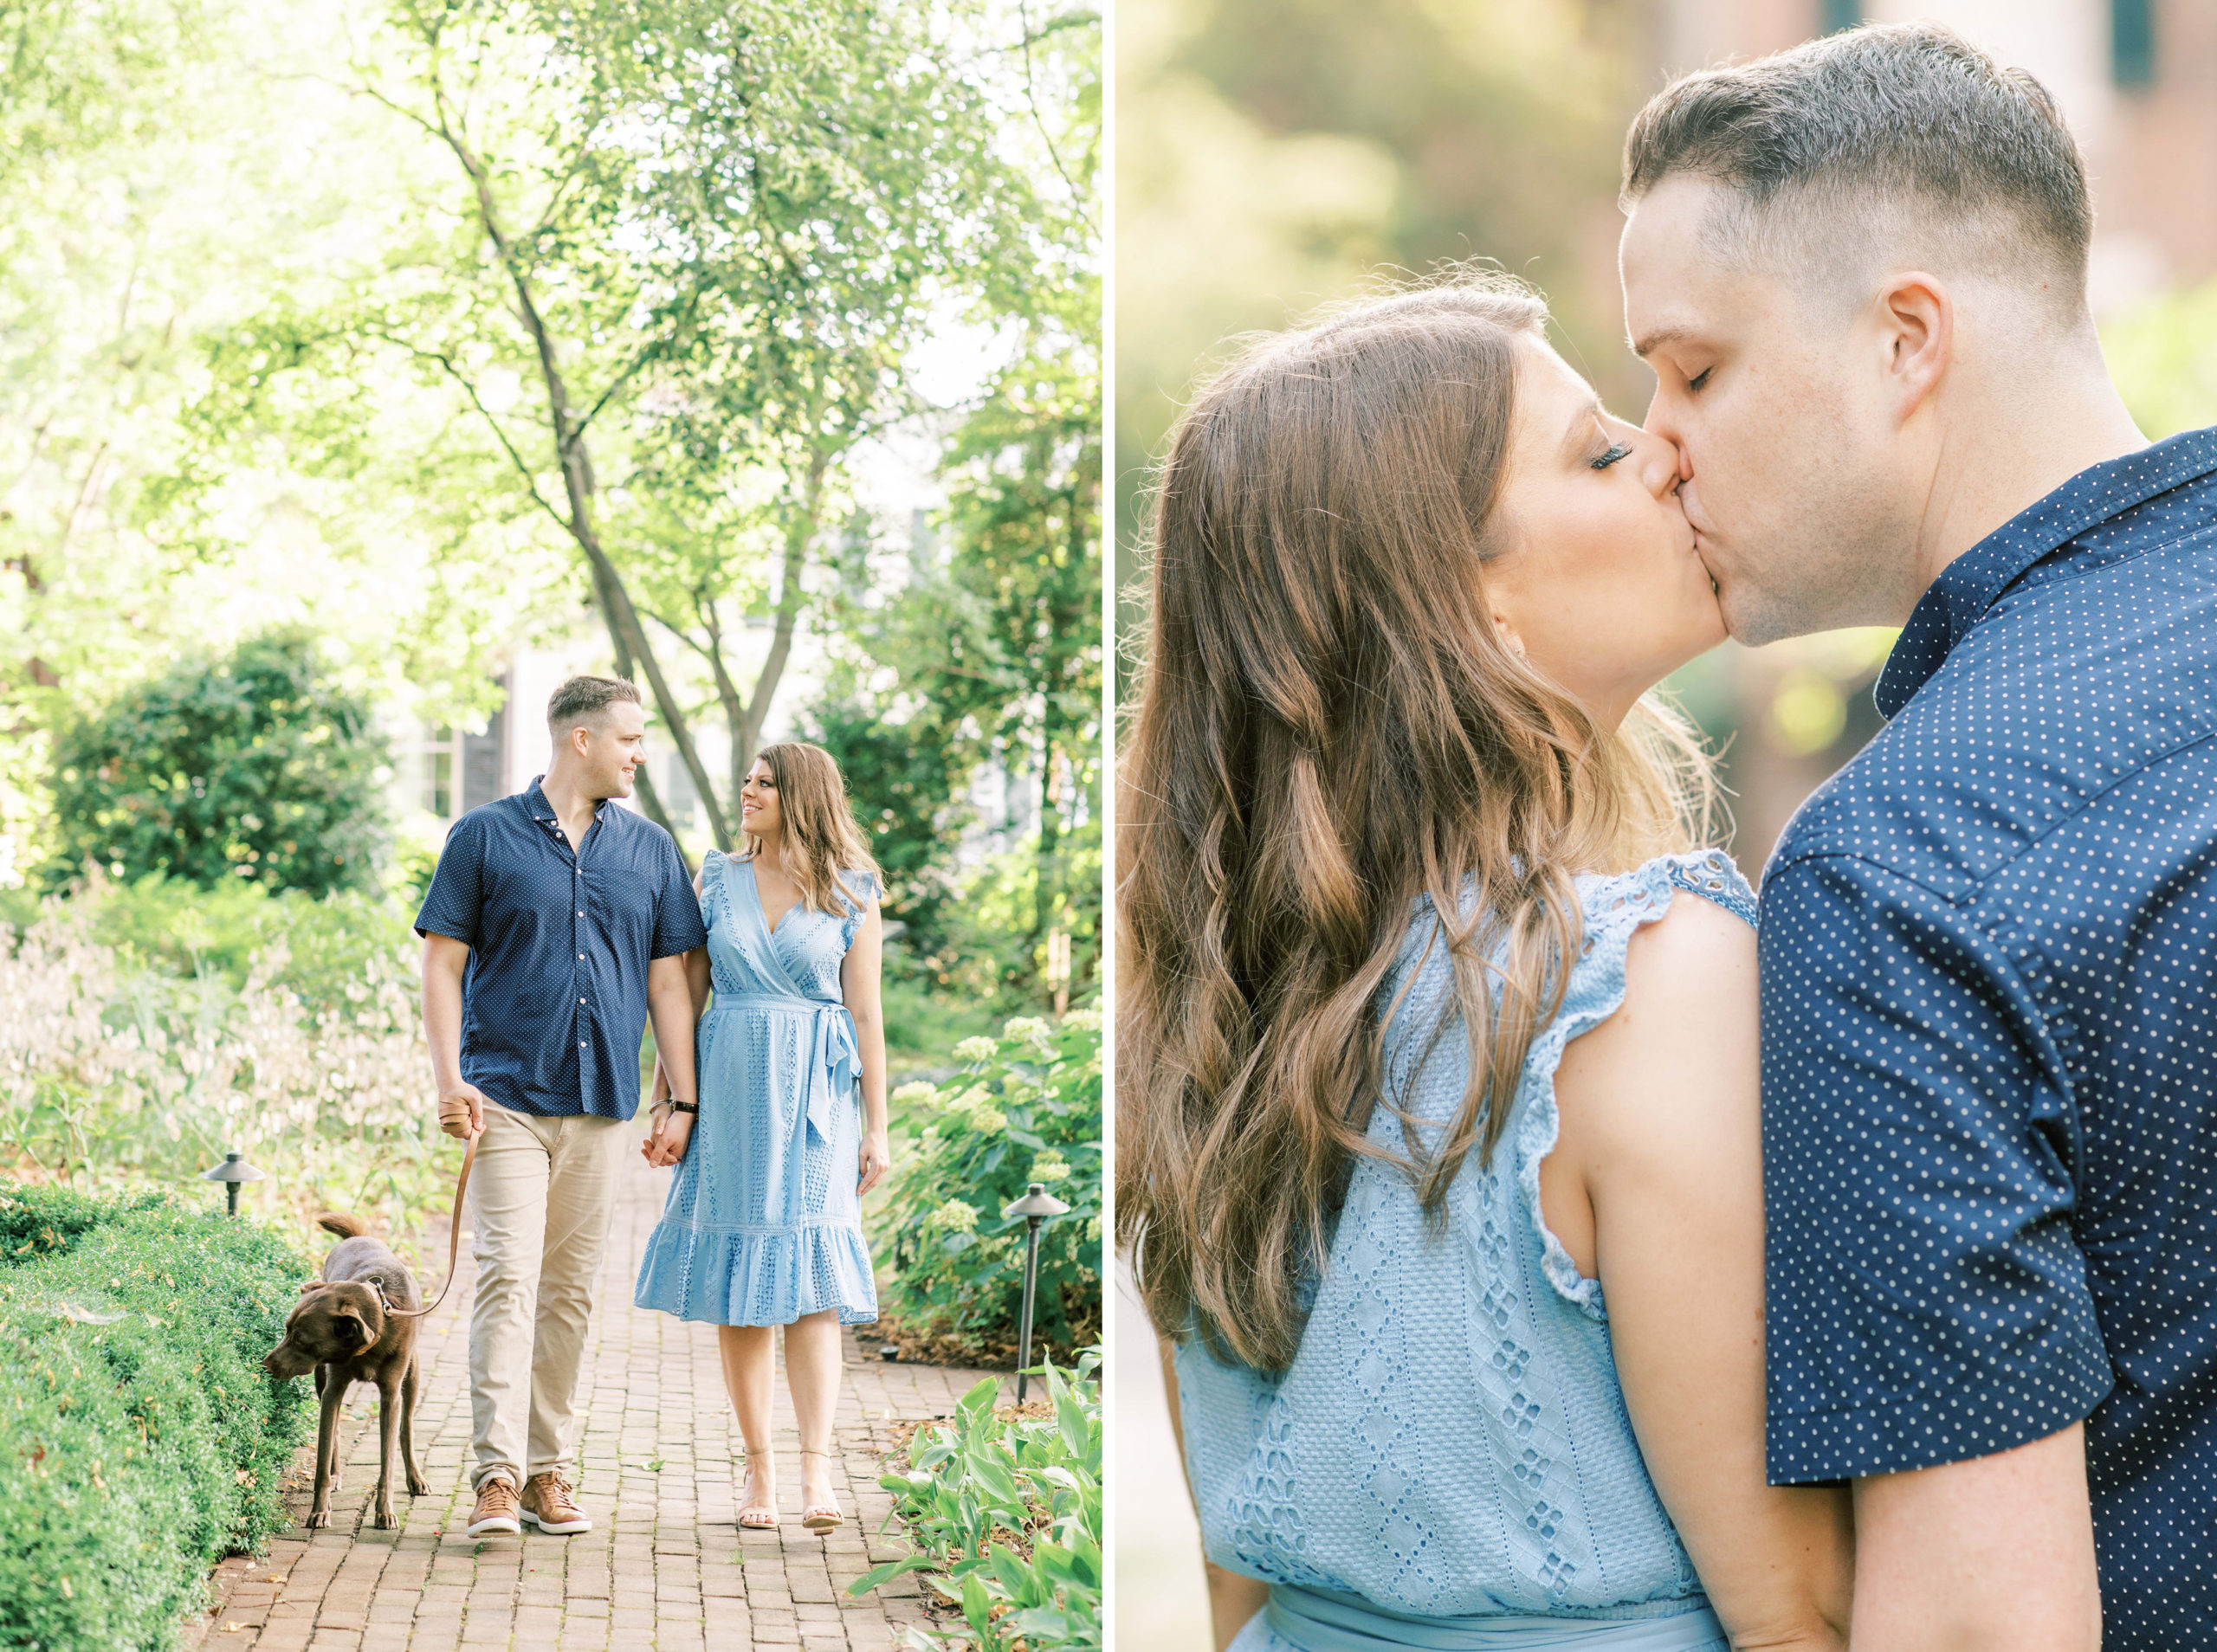 A fine-art anniversary session at sunrise throughout Old Town Alexandria, including the waterfront, cobblestone streets, and the Carlyle House.